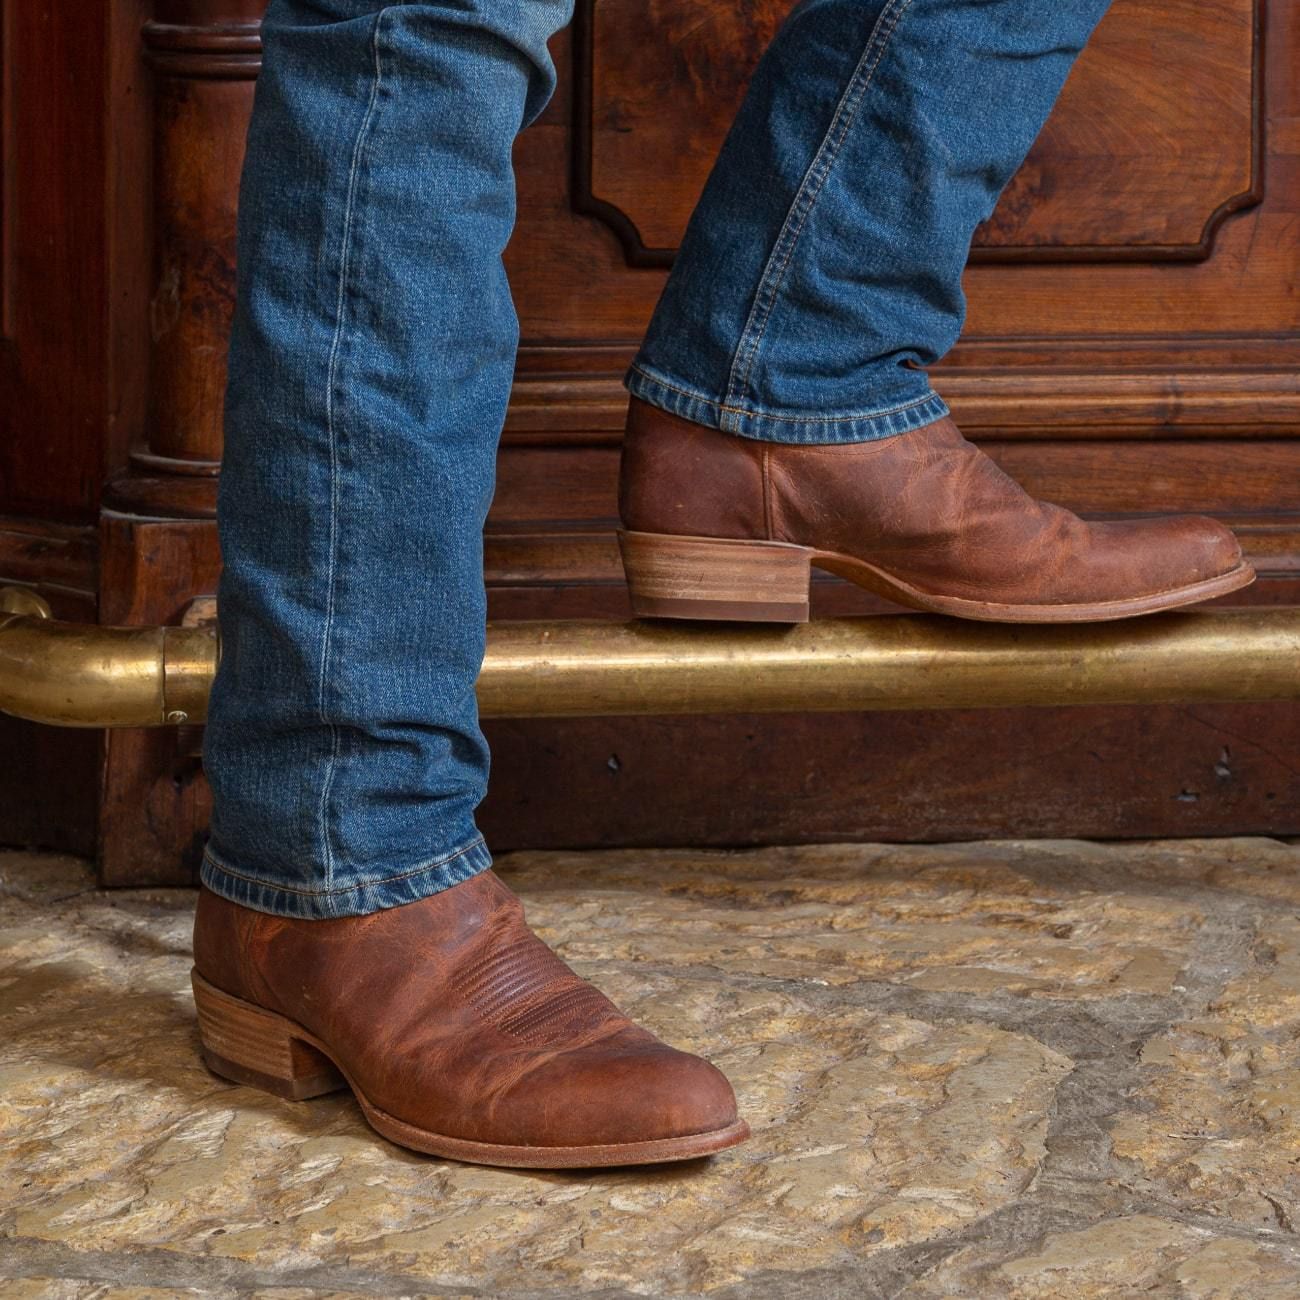 Look stylish with best pair of mens
cowboy boots